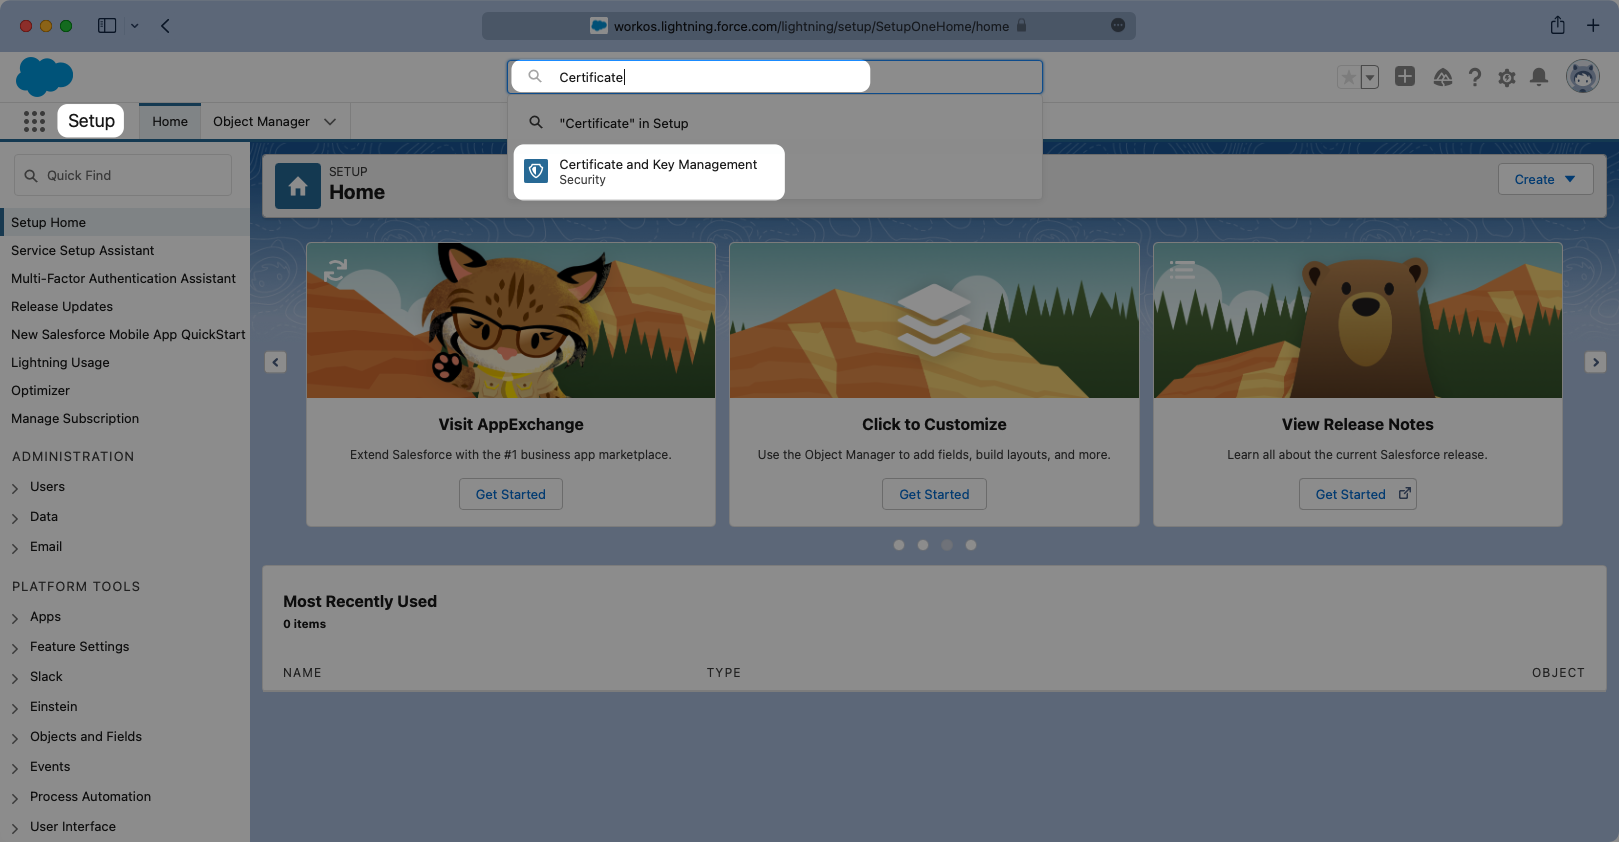 A screenshot showing how to navigate to the "Certificate and Key Management" page in the Salesforce dashboard.